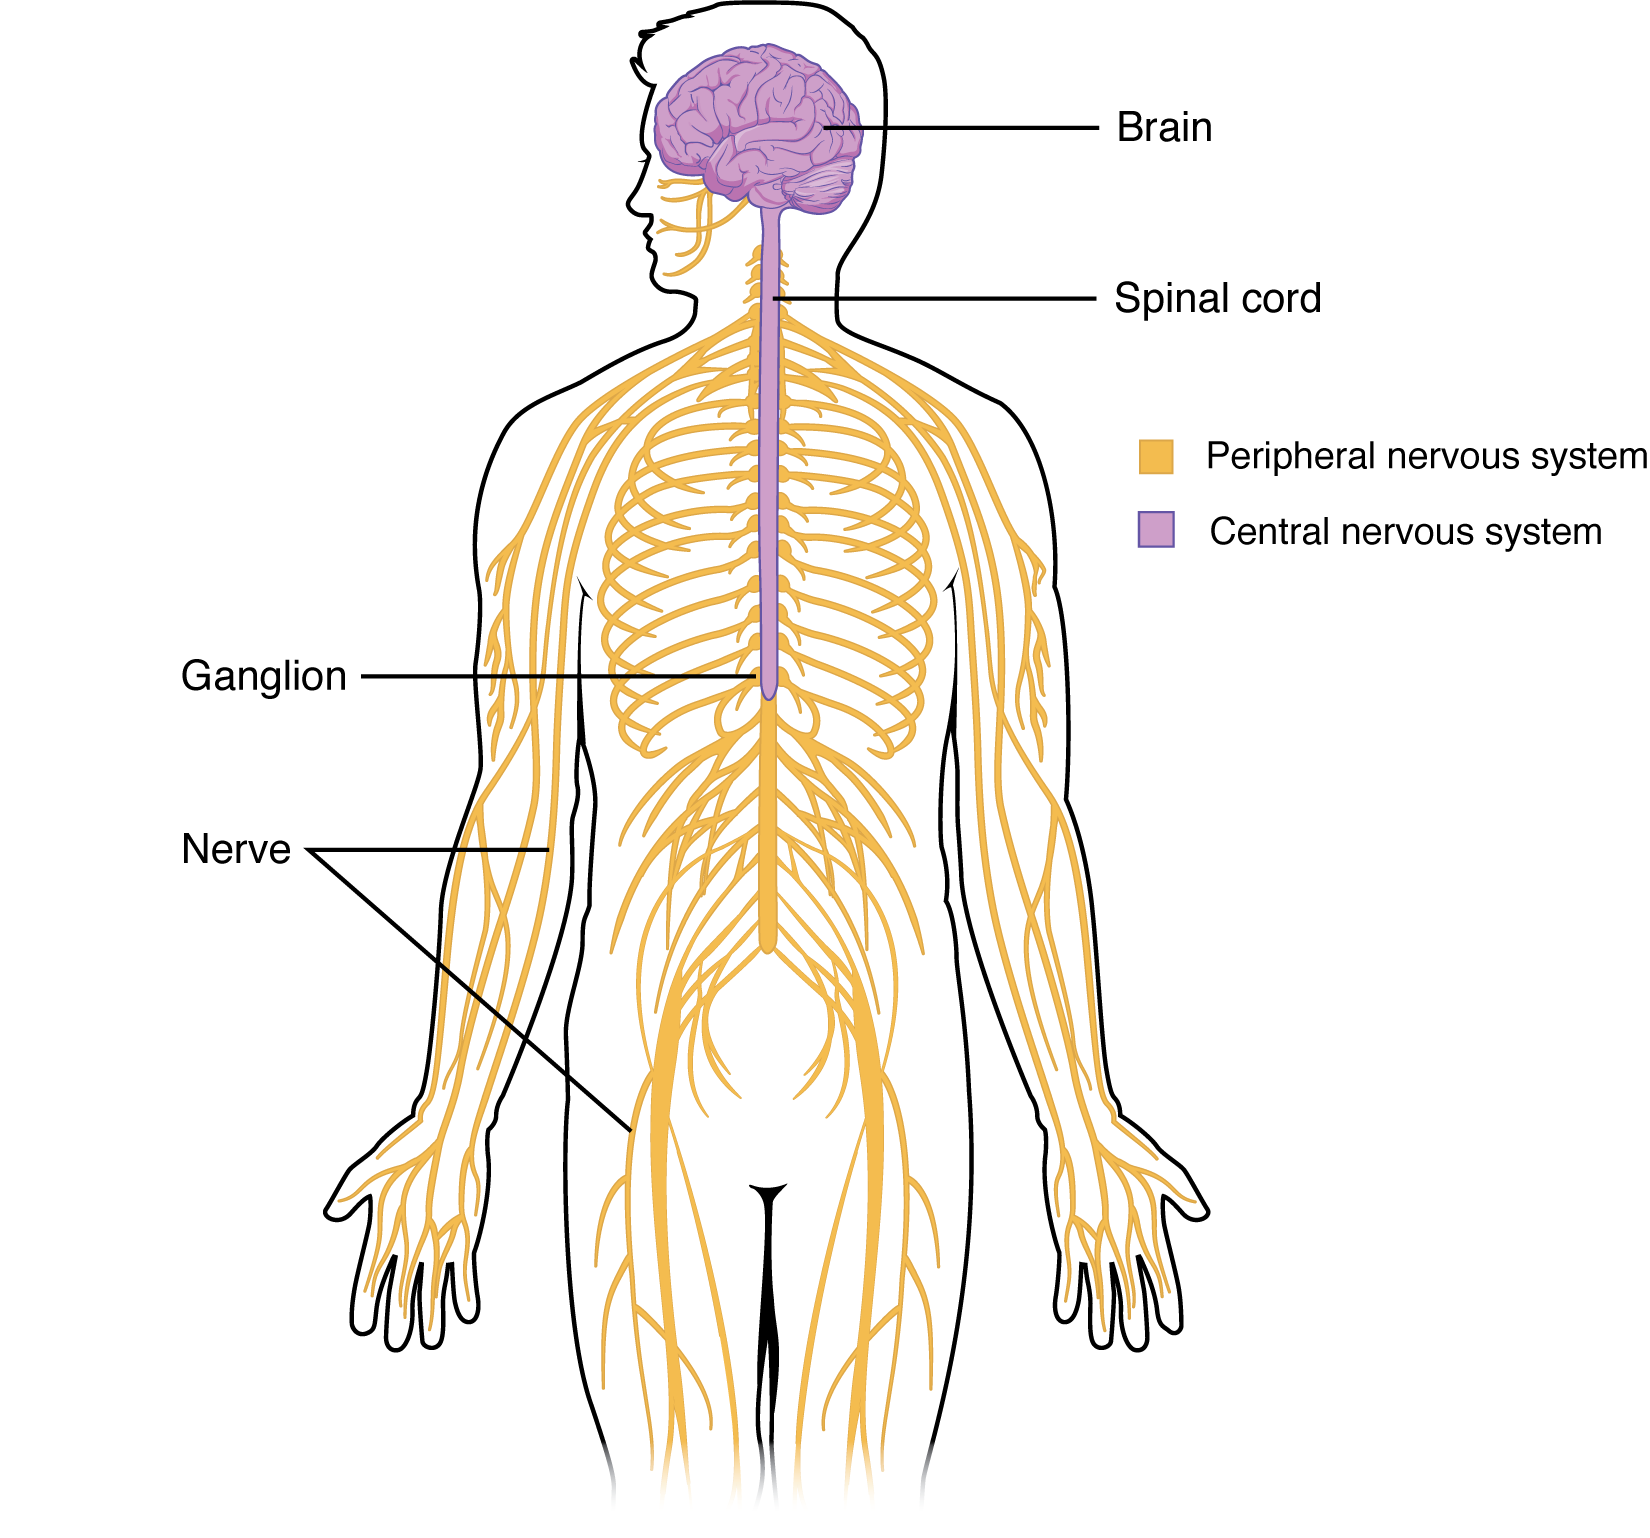 This diagram shows a silhouette of a human highlighting the nervous system. The central nervous system is composed of the brain and spinal cord. The brain is a large mass of ridged and striated tissue within the head. The spinal cord extends down from the brain and travels through the torso, ending in the pelvis. Pairs of enlarged nervous tissue, labeled ganglia, flank the spinal cord as it travels through the rib area. The ganglia are part of the peripheral nervous system, along with the many thread-like nerves that radiate from the spinal cord and ganglia through the arms, abdomen and legs.